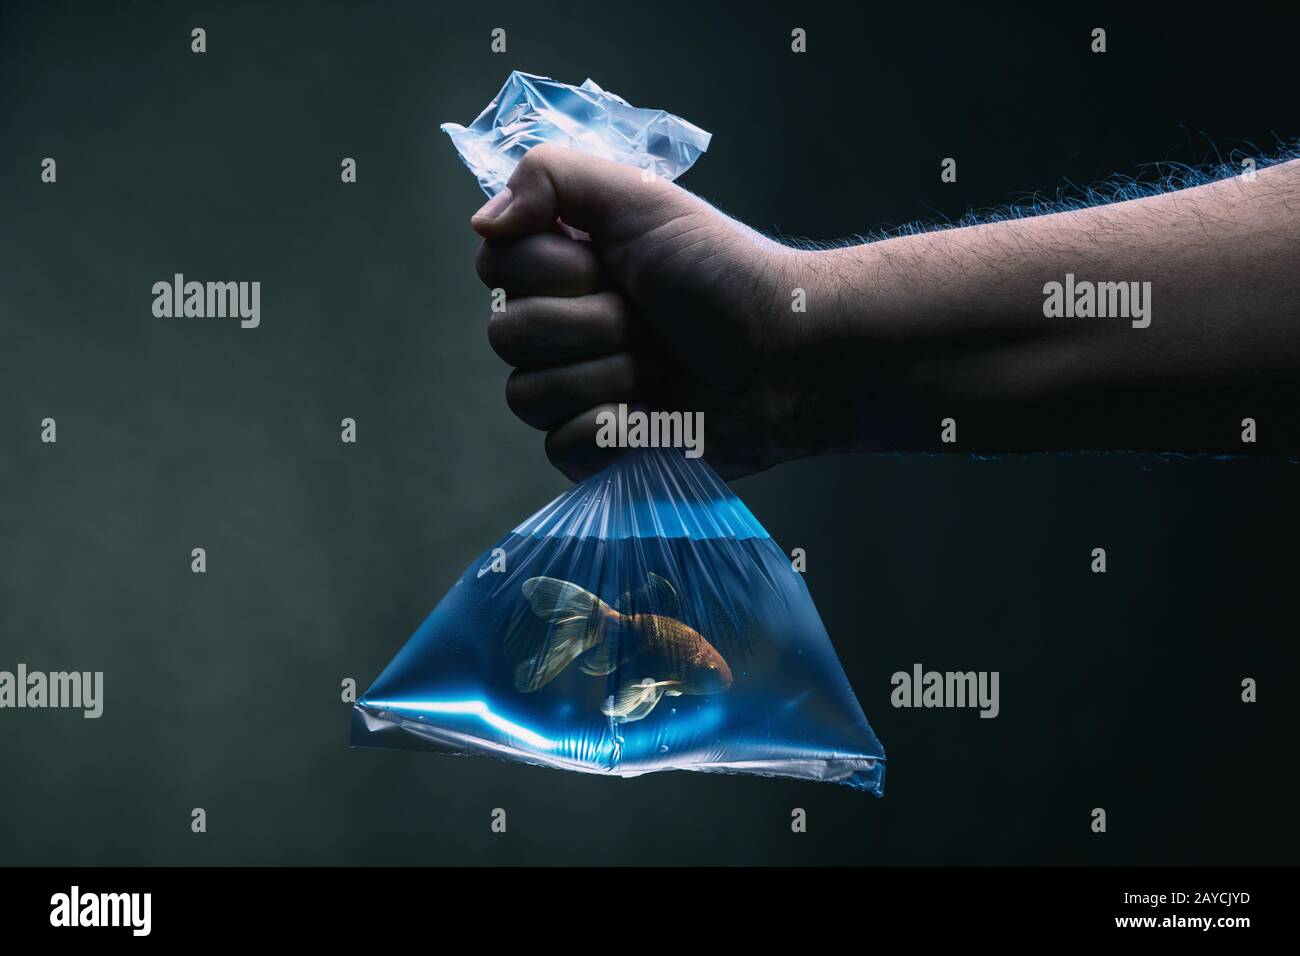 Swimming goldfish in a plastic bag filled with clean blue water under water scene. Environmental pollution, micro plastic and ha Stock Photo